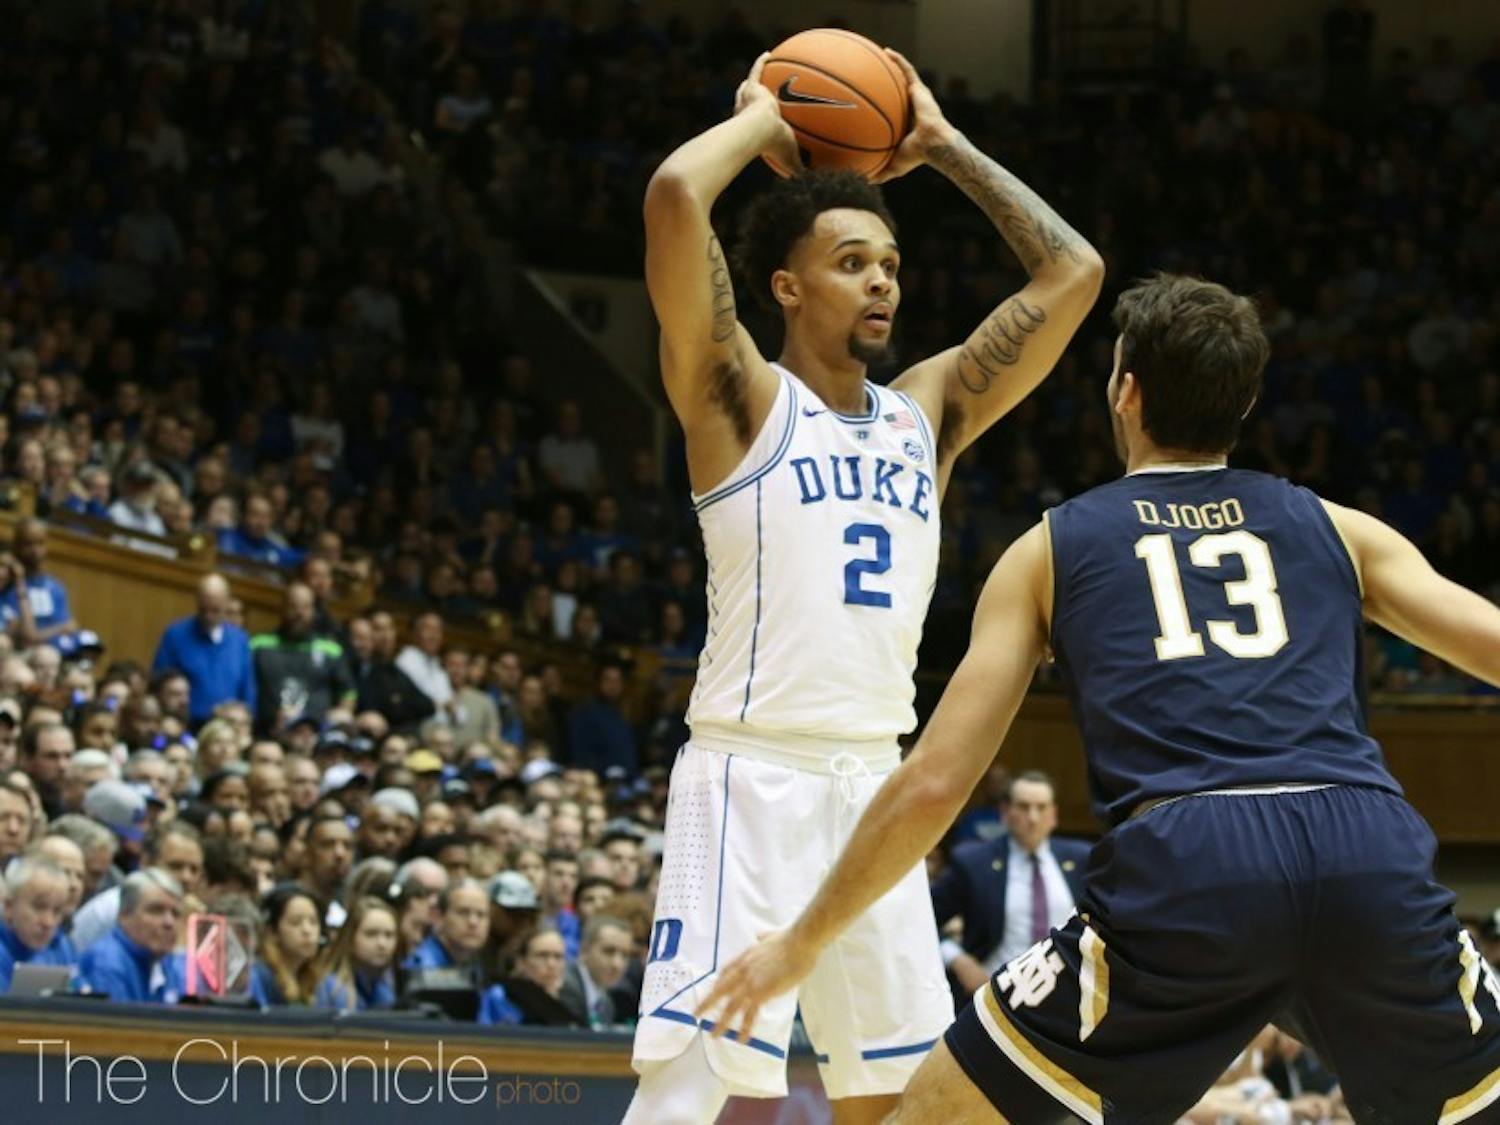 Gary Trent Jr. scored a career-high 44 points Saturday against the Cavaliers.